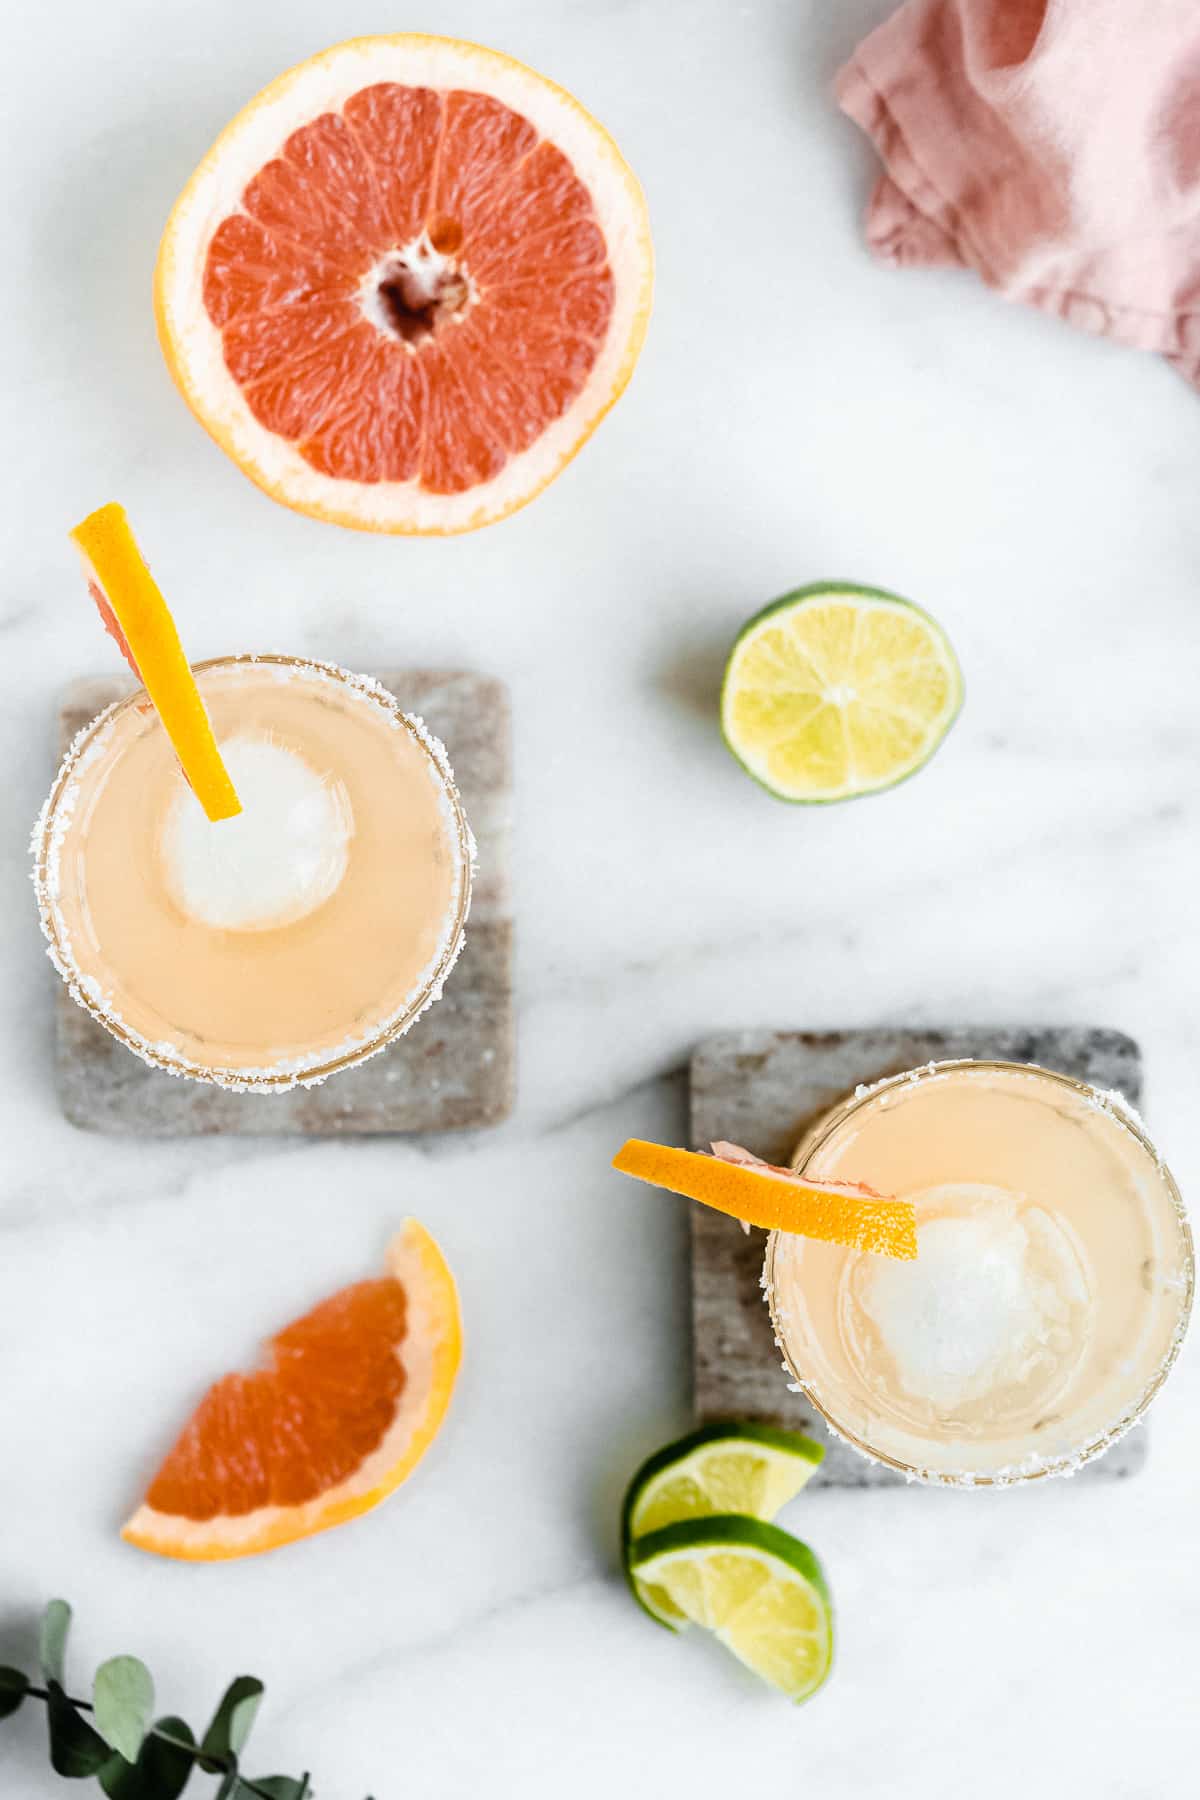 Overhead photo of two Skinny Smoky Grapefruit Margaritas served in crystal glasses sitting on marble coasters.  The glasses have salted rims and are garnished with a slice of grapefruit.  